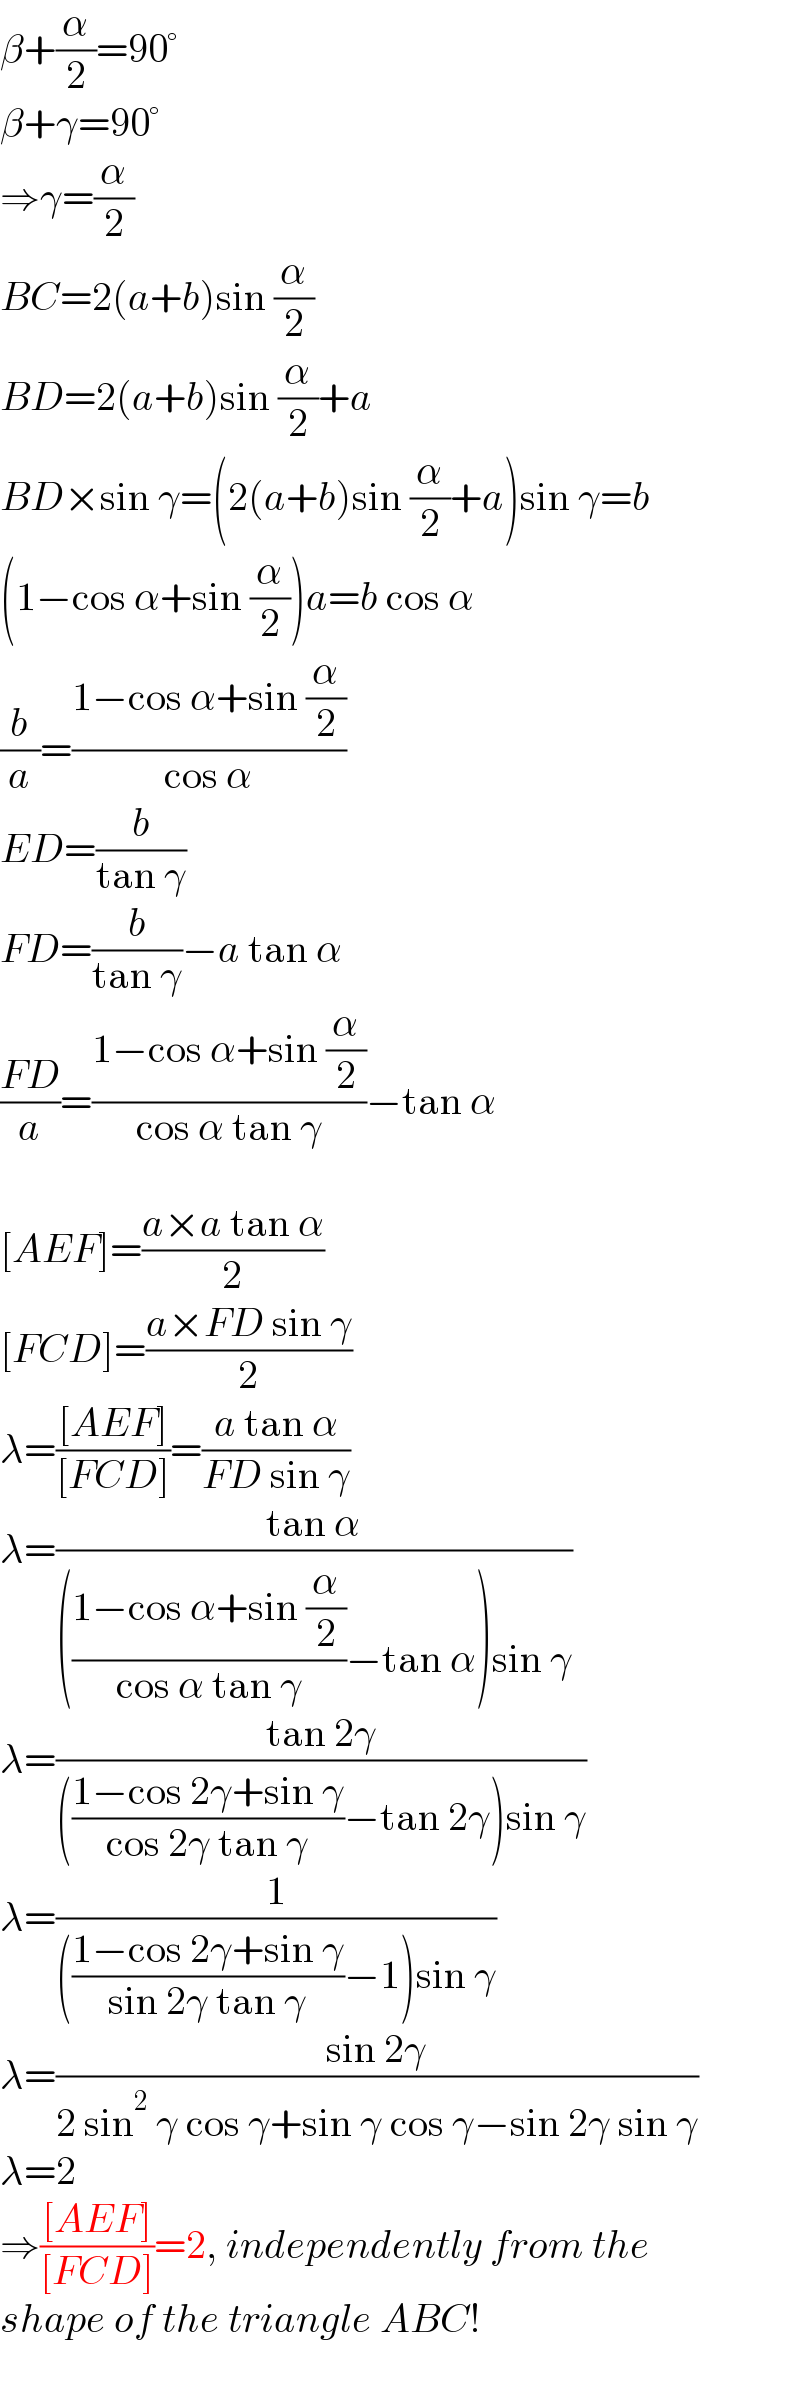 β+(α/2)=90°  β+γ=90°  ⇒γ=(α/2)  BC=2(a+b)sin (α/2)  BD=2(a+b)sin (α/2)+a  BD×sin γ=(2(a+b)sin (α/2)+a)sin γ=b  (1−cos α+sin (α/2))a=b cos α  (b/a)=((1−cos α+sin (α/2))/(cos α))  ED=(b/(tan γ))  FD=(b/(tan γ))−a tan α  ((FD)/a)=((1−cos α+sin (α/2))/(cos α tan γ))−tan α    [AEF]=((a×a tan α)/2)  [FCD]=((a×FD sin γ)/2)  λ=(([AEF])/([FCD]))=((a tan α)/(FD sin γ))  λ=((tan α)/((((1−cos α+sin (α/2))/(cos α tan γ))−tan α)sin γ))  λ=((tan 2γ)/((((1−cos 2γ+sin γ)/(cos 2γ tan γ))−tan 2γ)sin γ))  λ=(1/((((1−cos 2γ+sin γ)/(sin 2γ tan γ))−1)sin γ))  λ=((sin 2γ)/(2 sin^2  γ cos γ+sin γ cos γ−sin 2γ sin γ))  λ=2  ⇒(([AEF])/([FCD]))=2, independently from the  shape of the triangle ABC!  